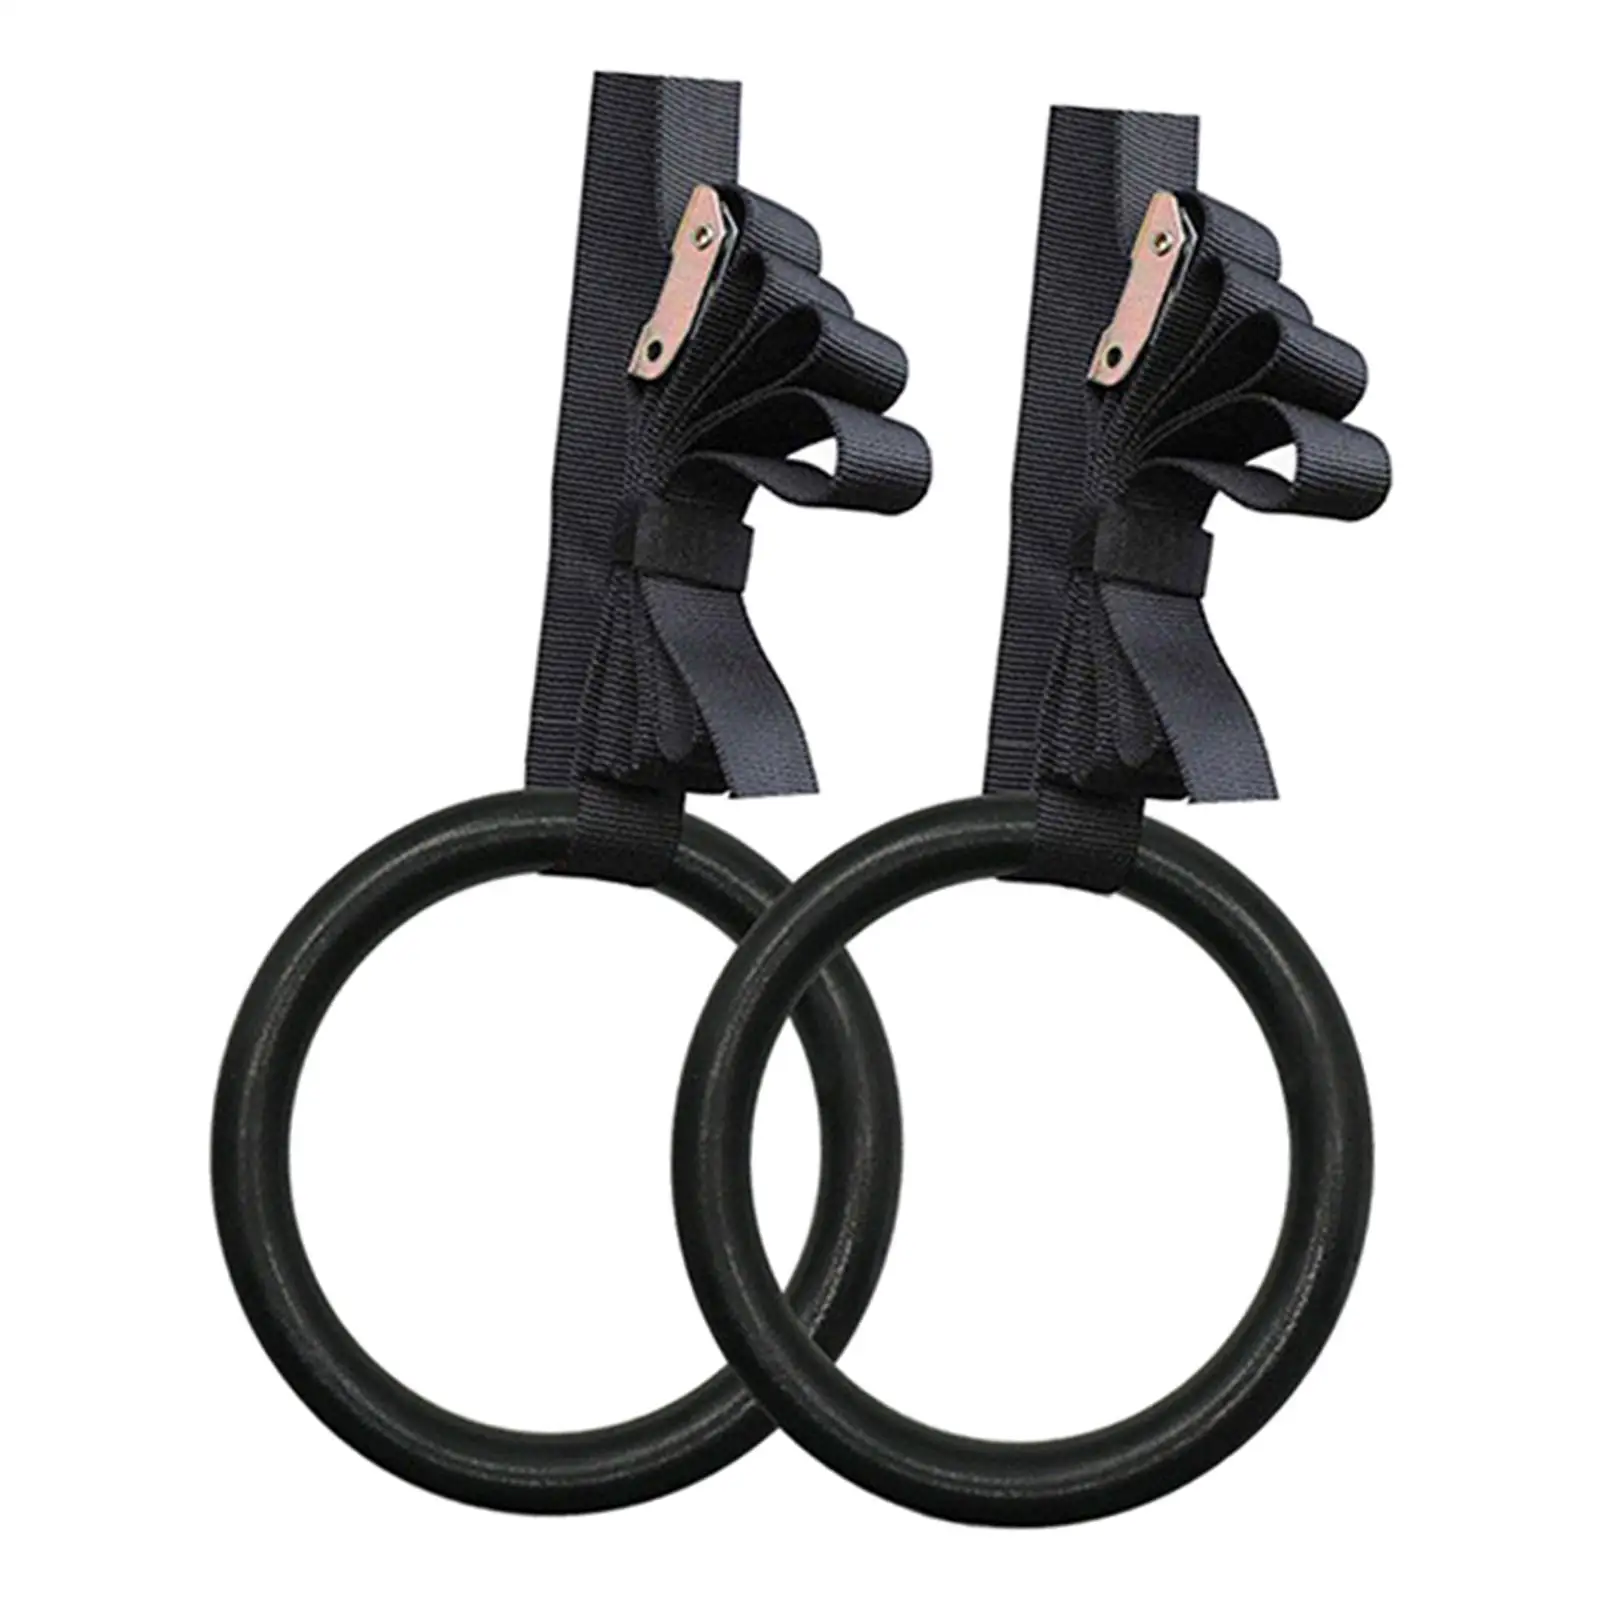 2Pcs Gymnastic Ring with Straps Trainer for Training Core Workout Pull Ups